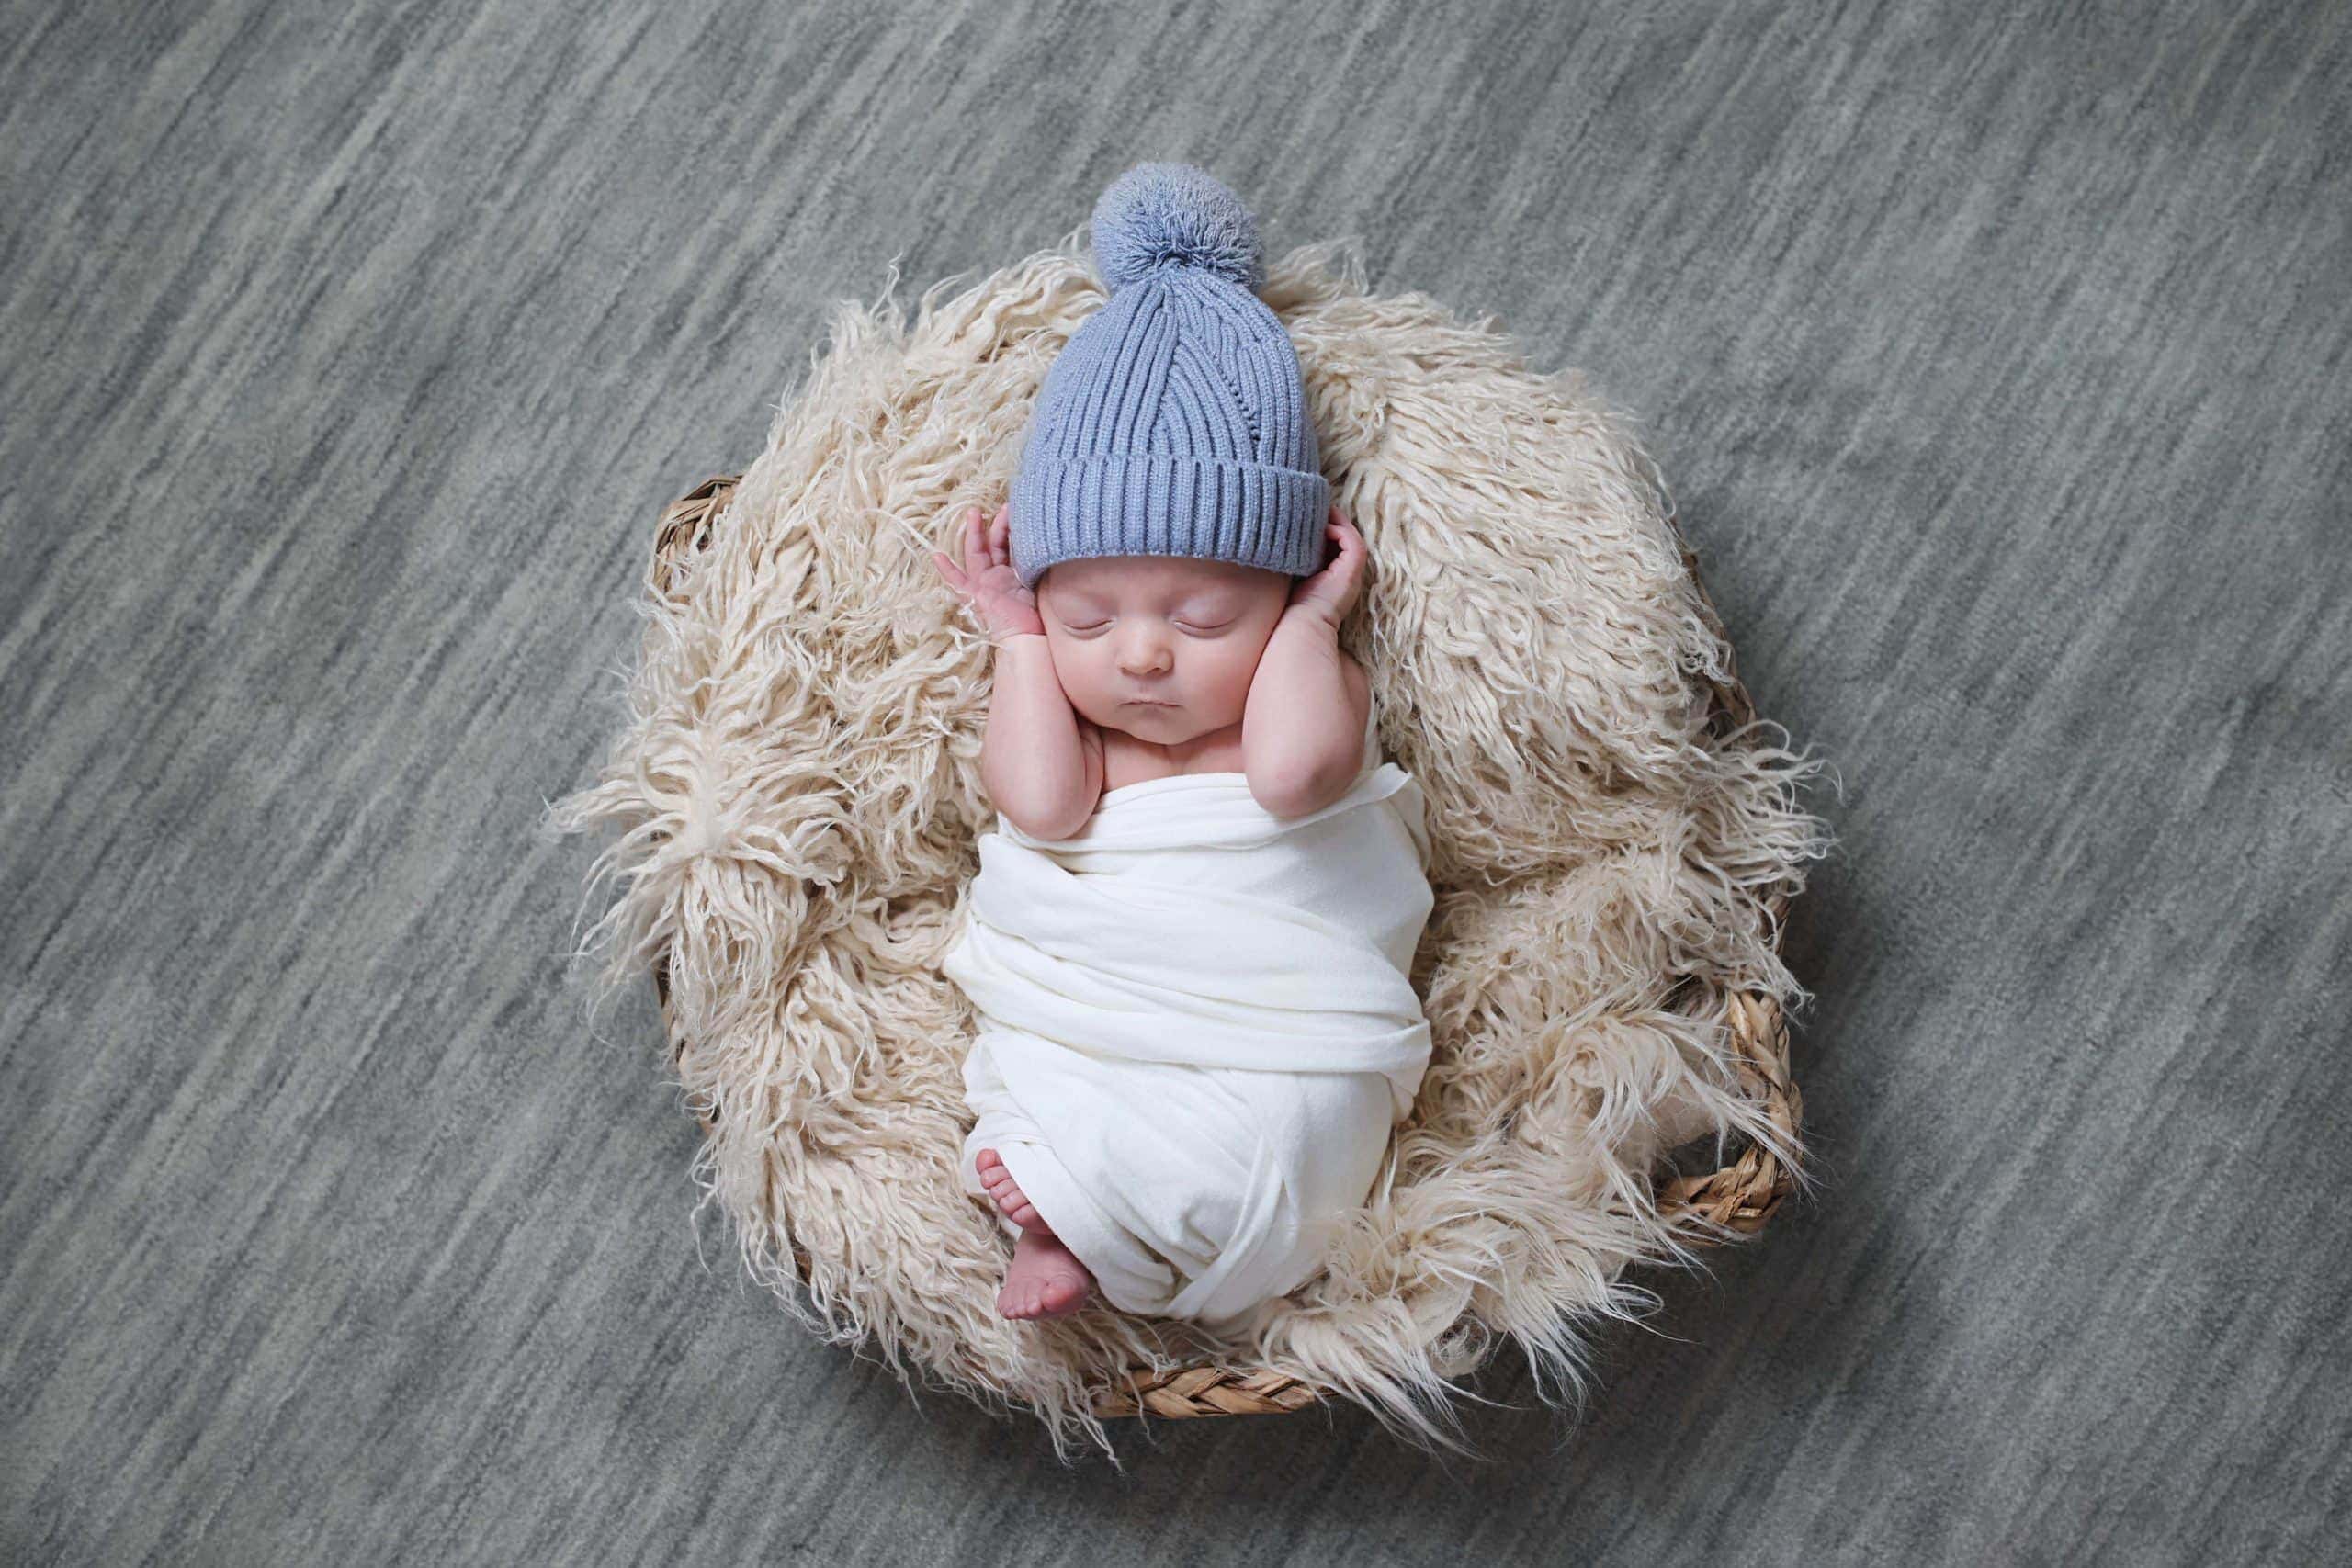 Studio style newborn image of a baby wrapped in a white swaddle, posed in a curved bowl with a faux fur blanket background and blue knitted hat